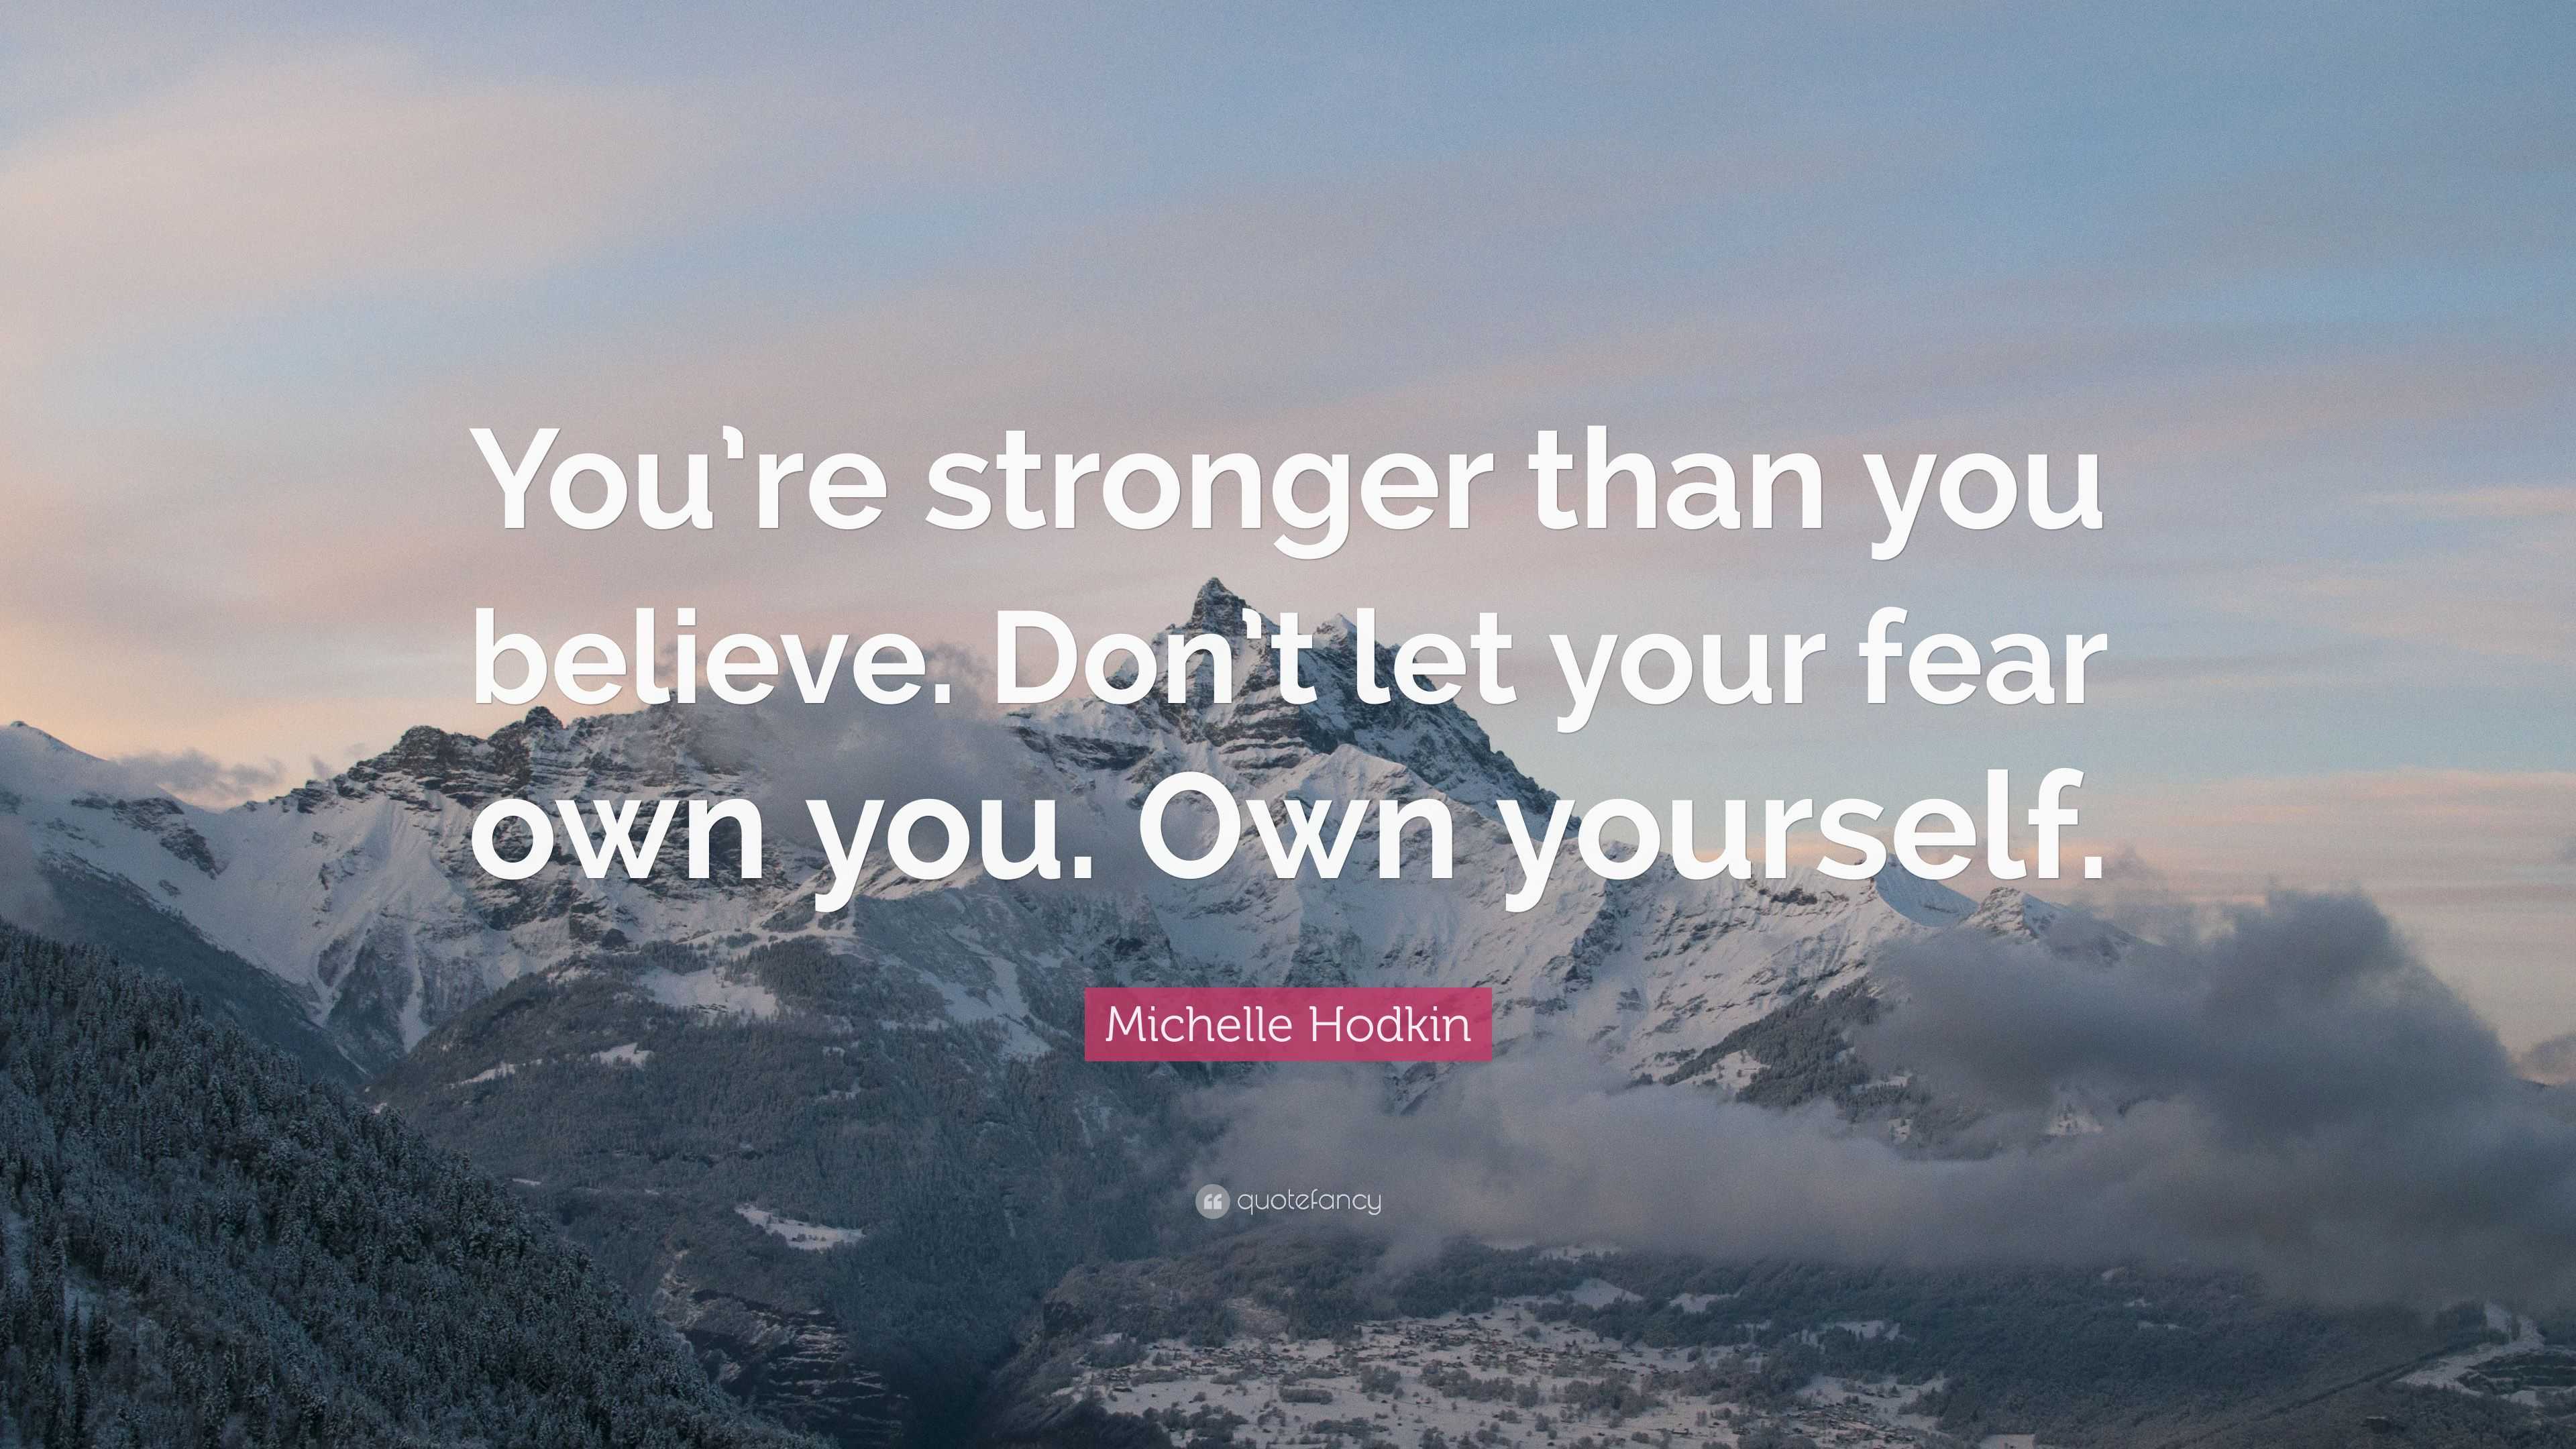 Michelle Hodkin Quote: "You're stronger than you believe. Don't let your fear own you. Own ...